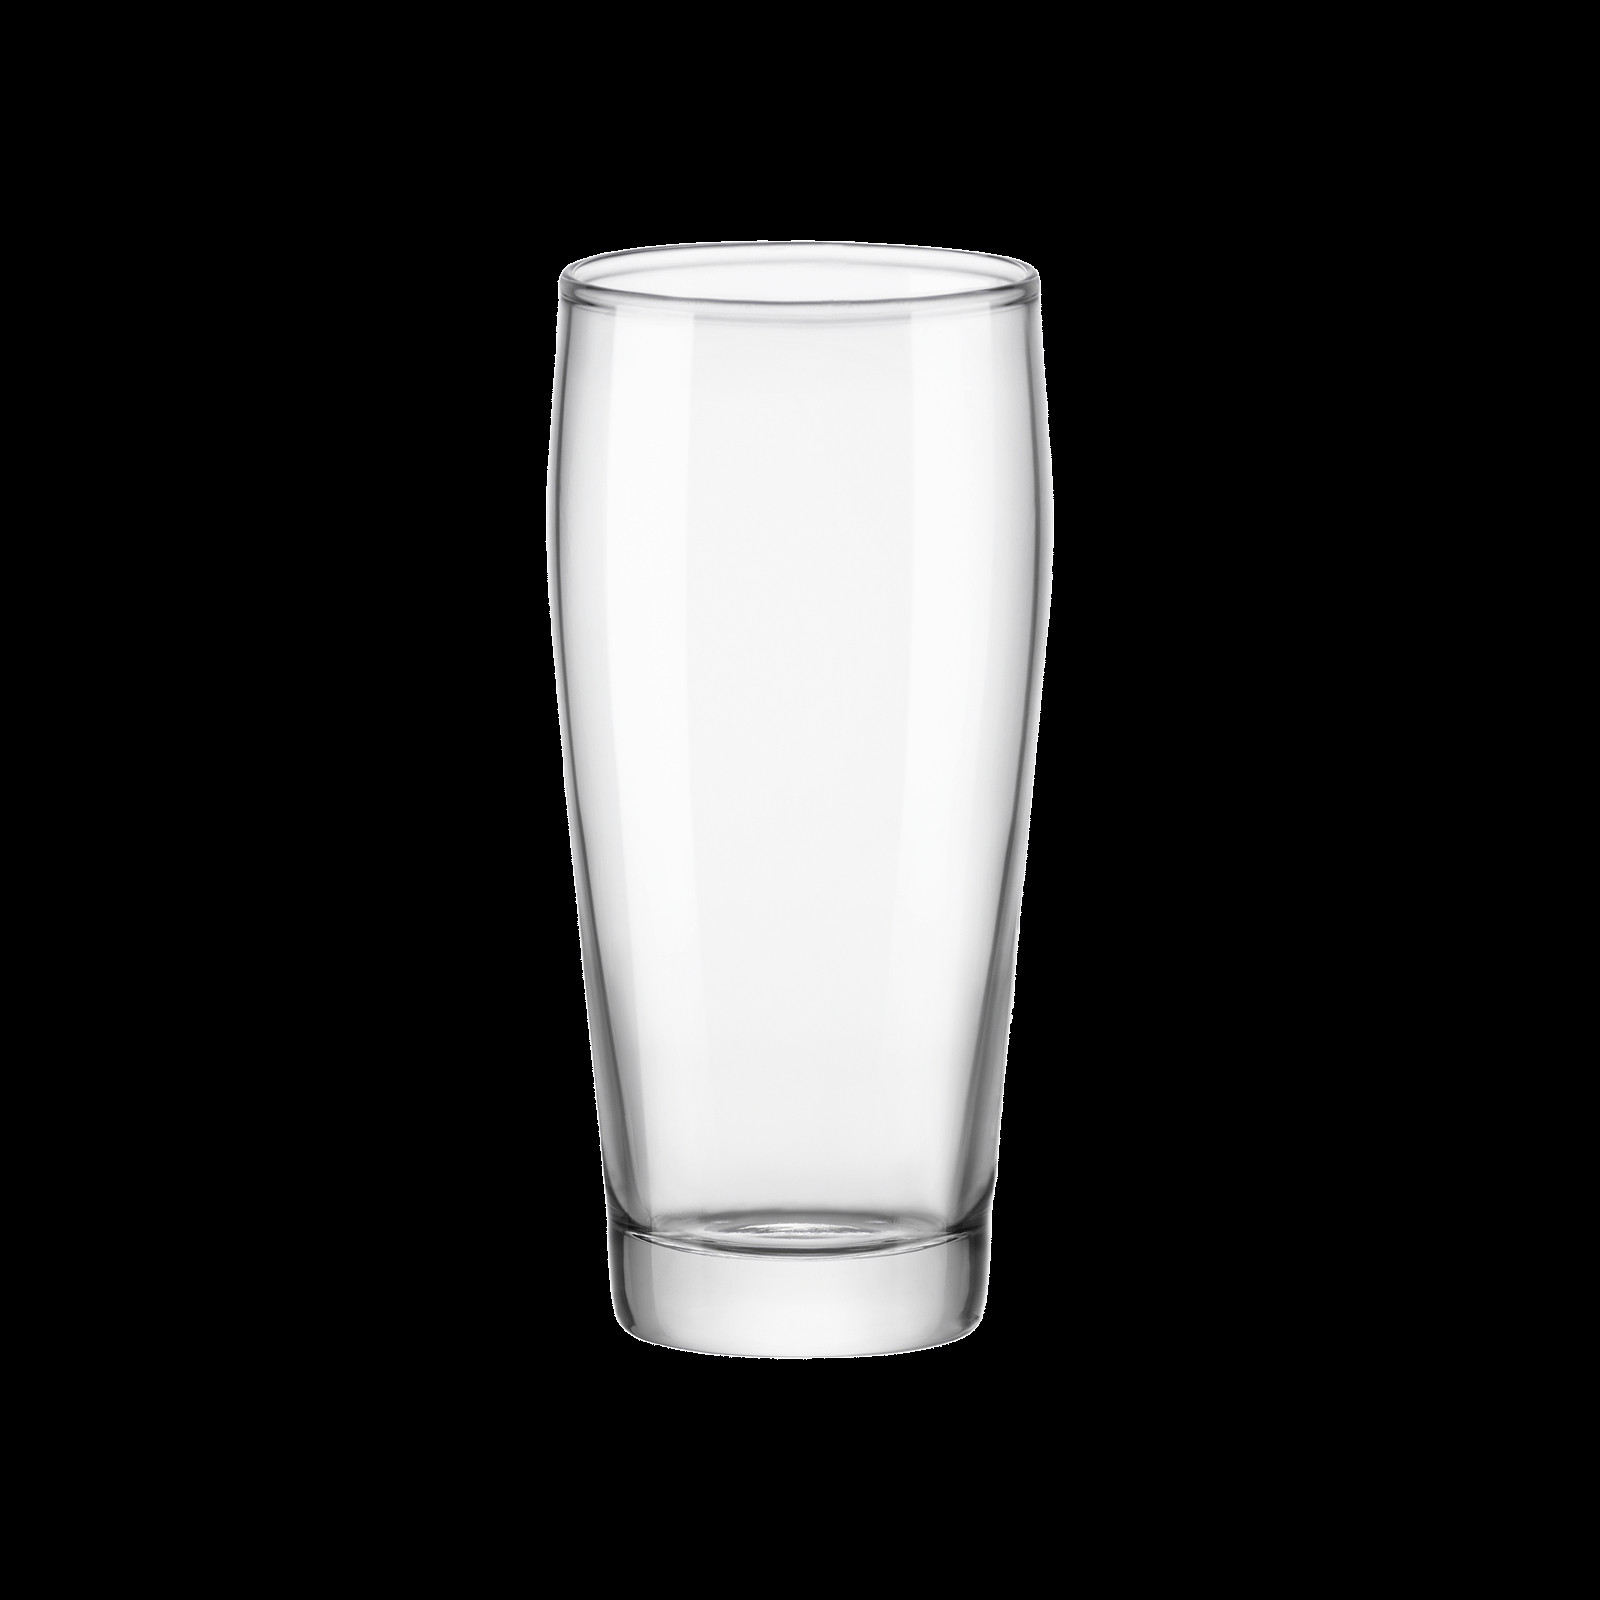 18 Recommended Thin Rectangle Glass Vase 2024 free download thin rectangle glass vase of archivi products bormioli rocco pertaining to beer glass 11 oz